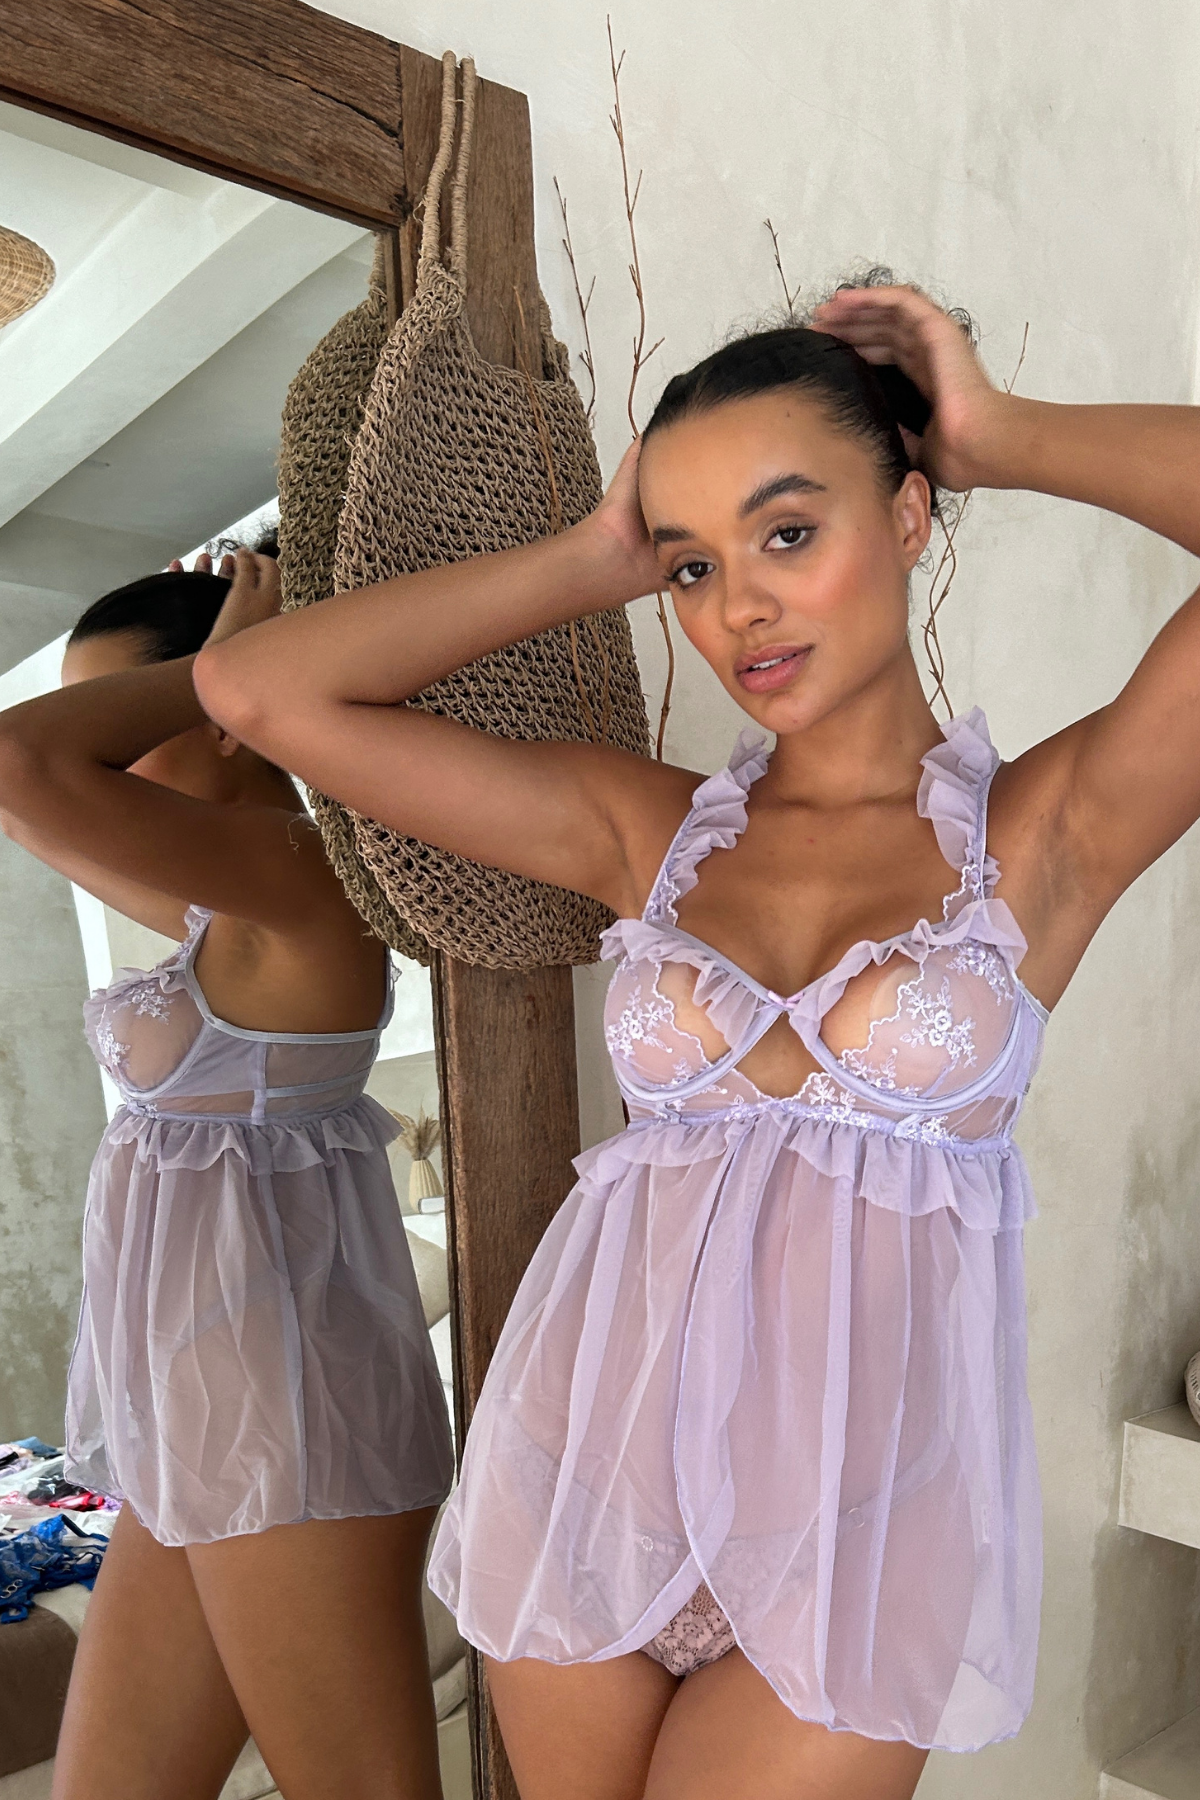 Based in Australia, One Empire Sleep features beautifully made lace lingerie sets, bralettes, lace bodysuits, bustiers and sleep sets in a range of colours and styles.